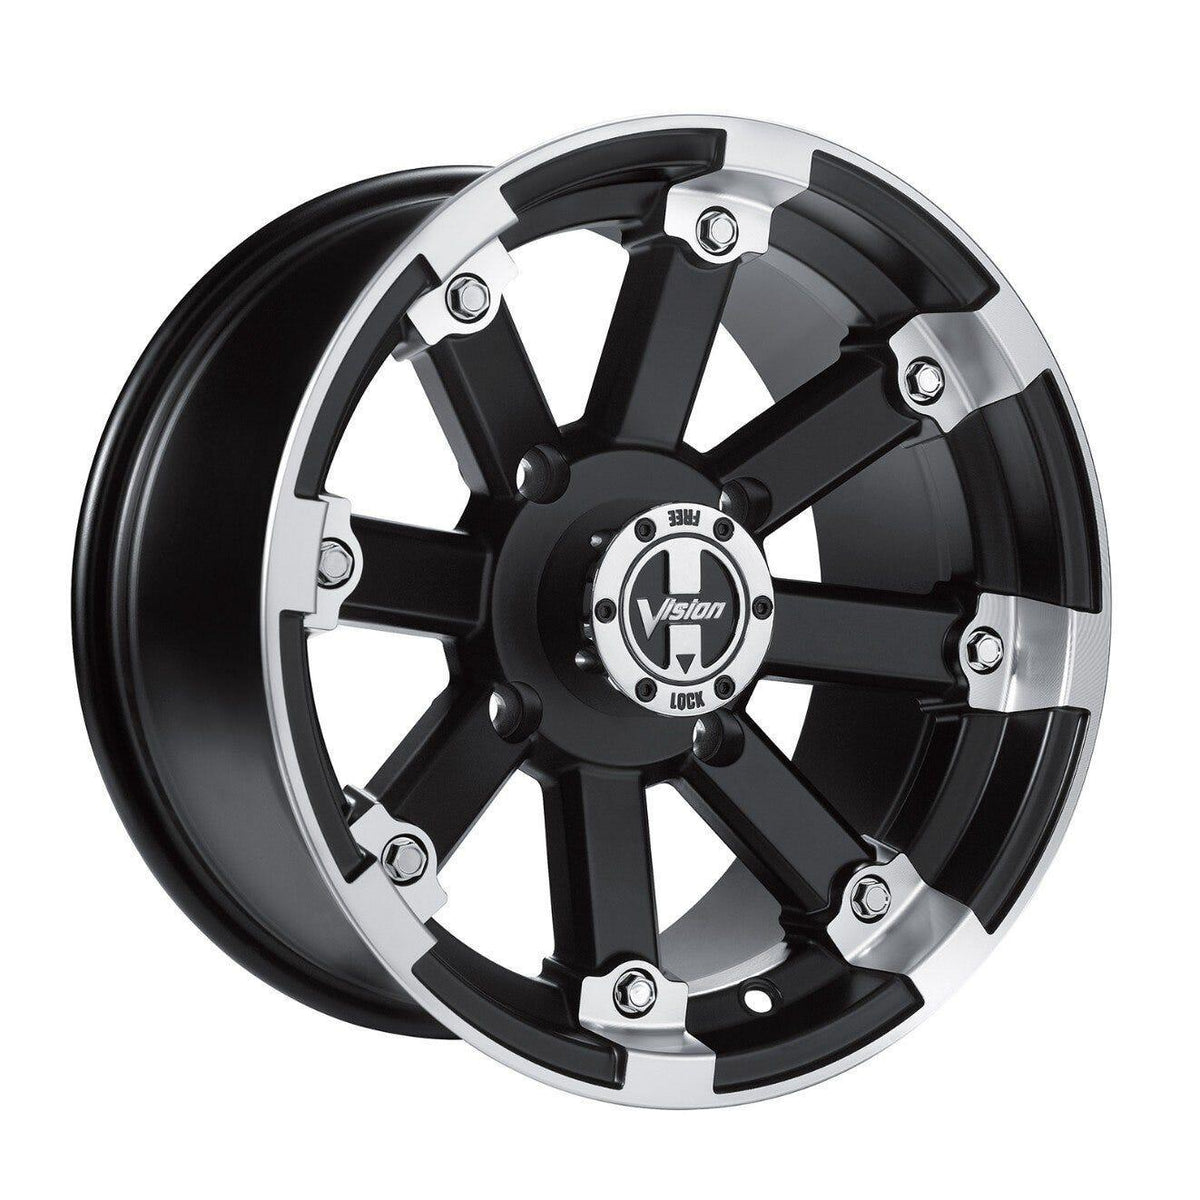 Lockout 393 14&quot; Rim by Vision - Front - Factory Recreation